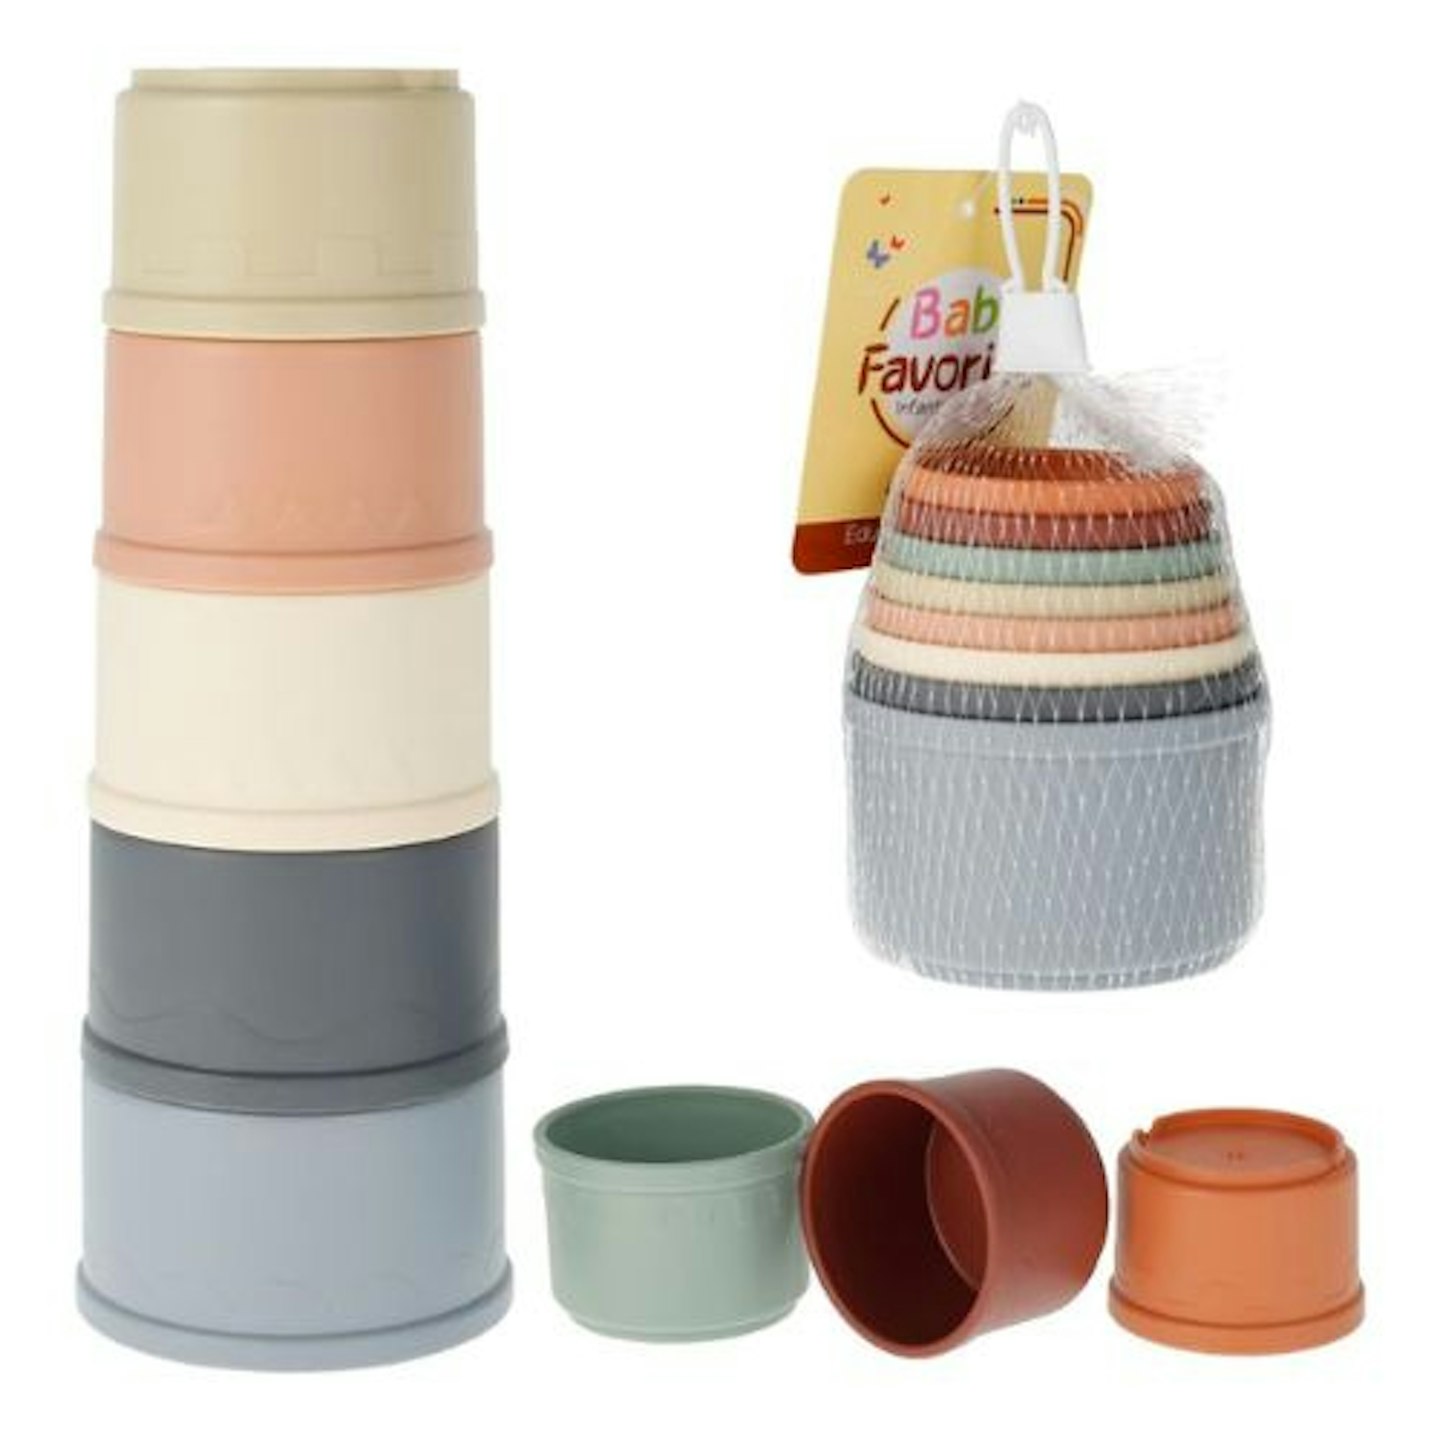 8pcs Stacking Cups Toy for Kids